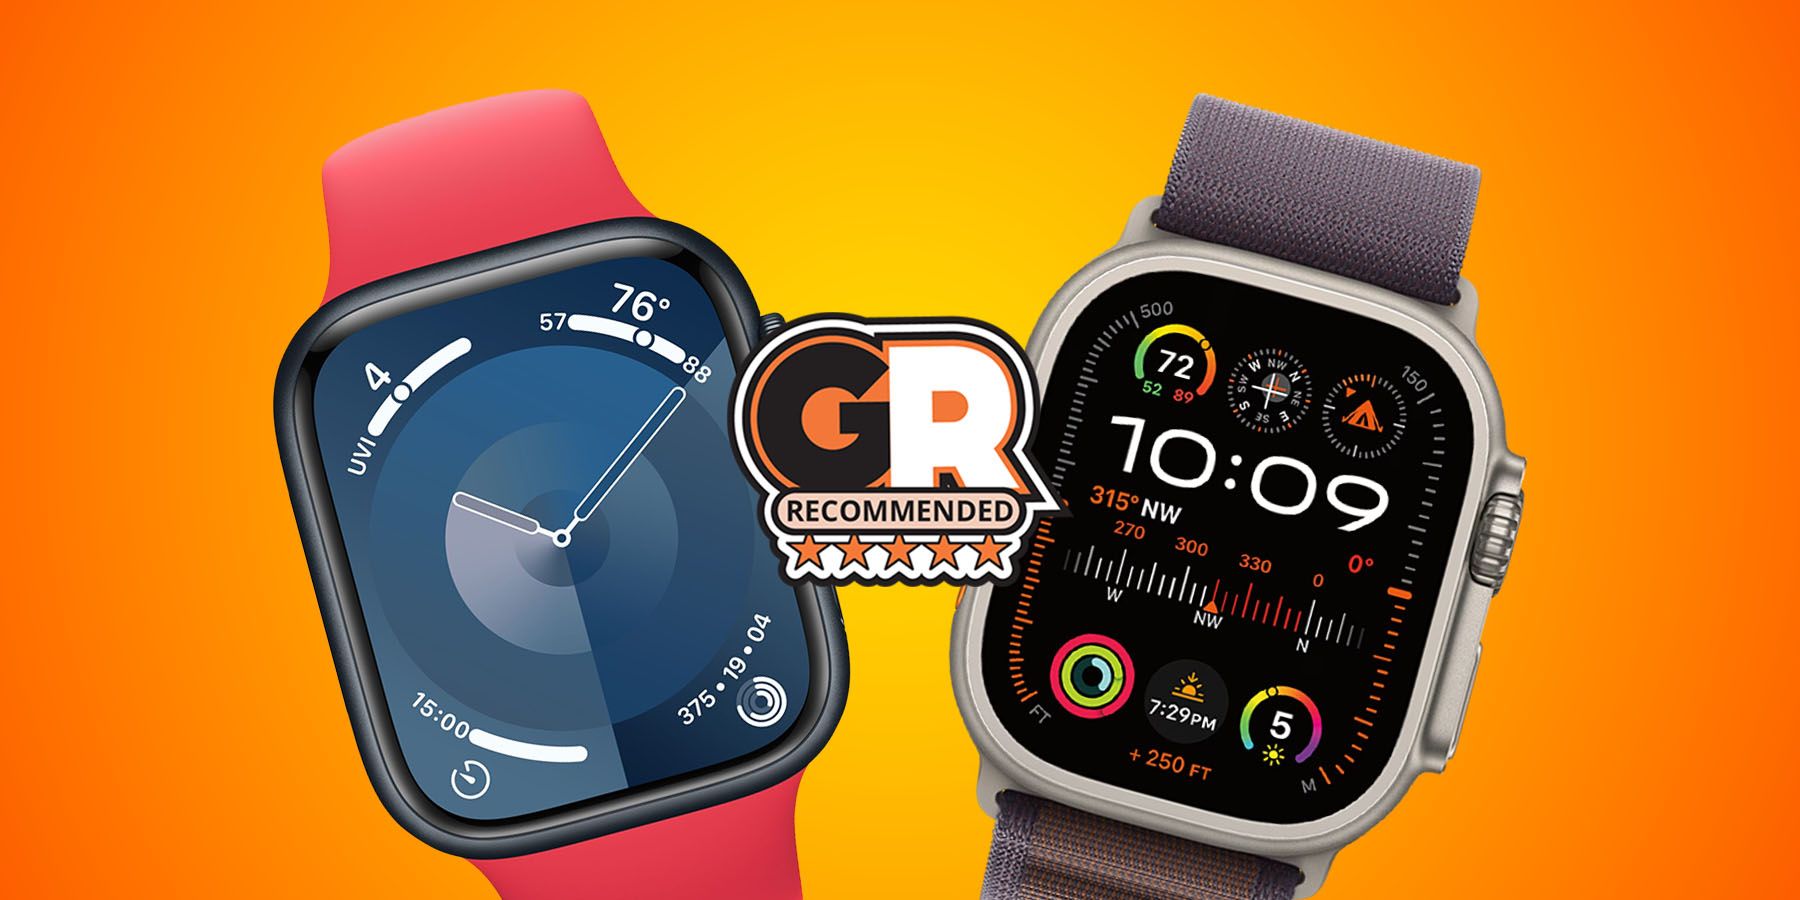 The Best Smartwatches for iPhone Thumb